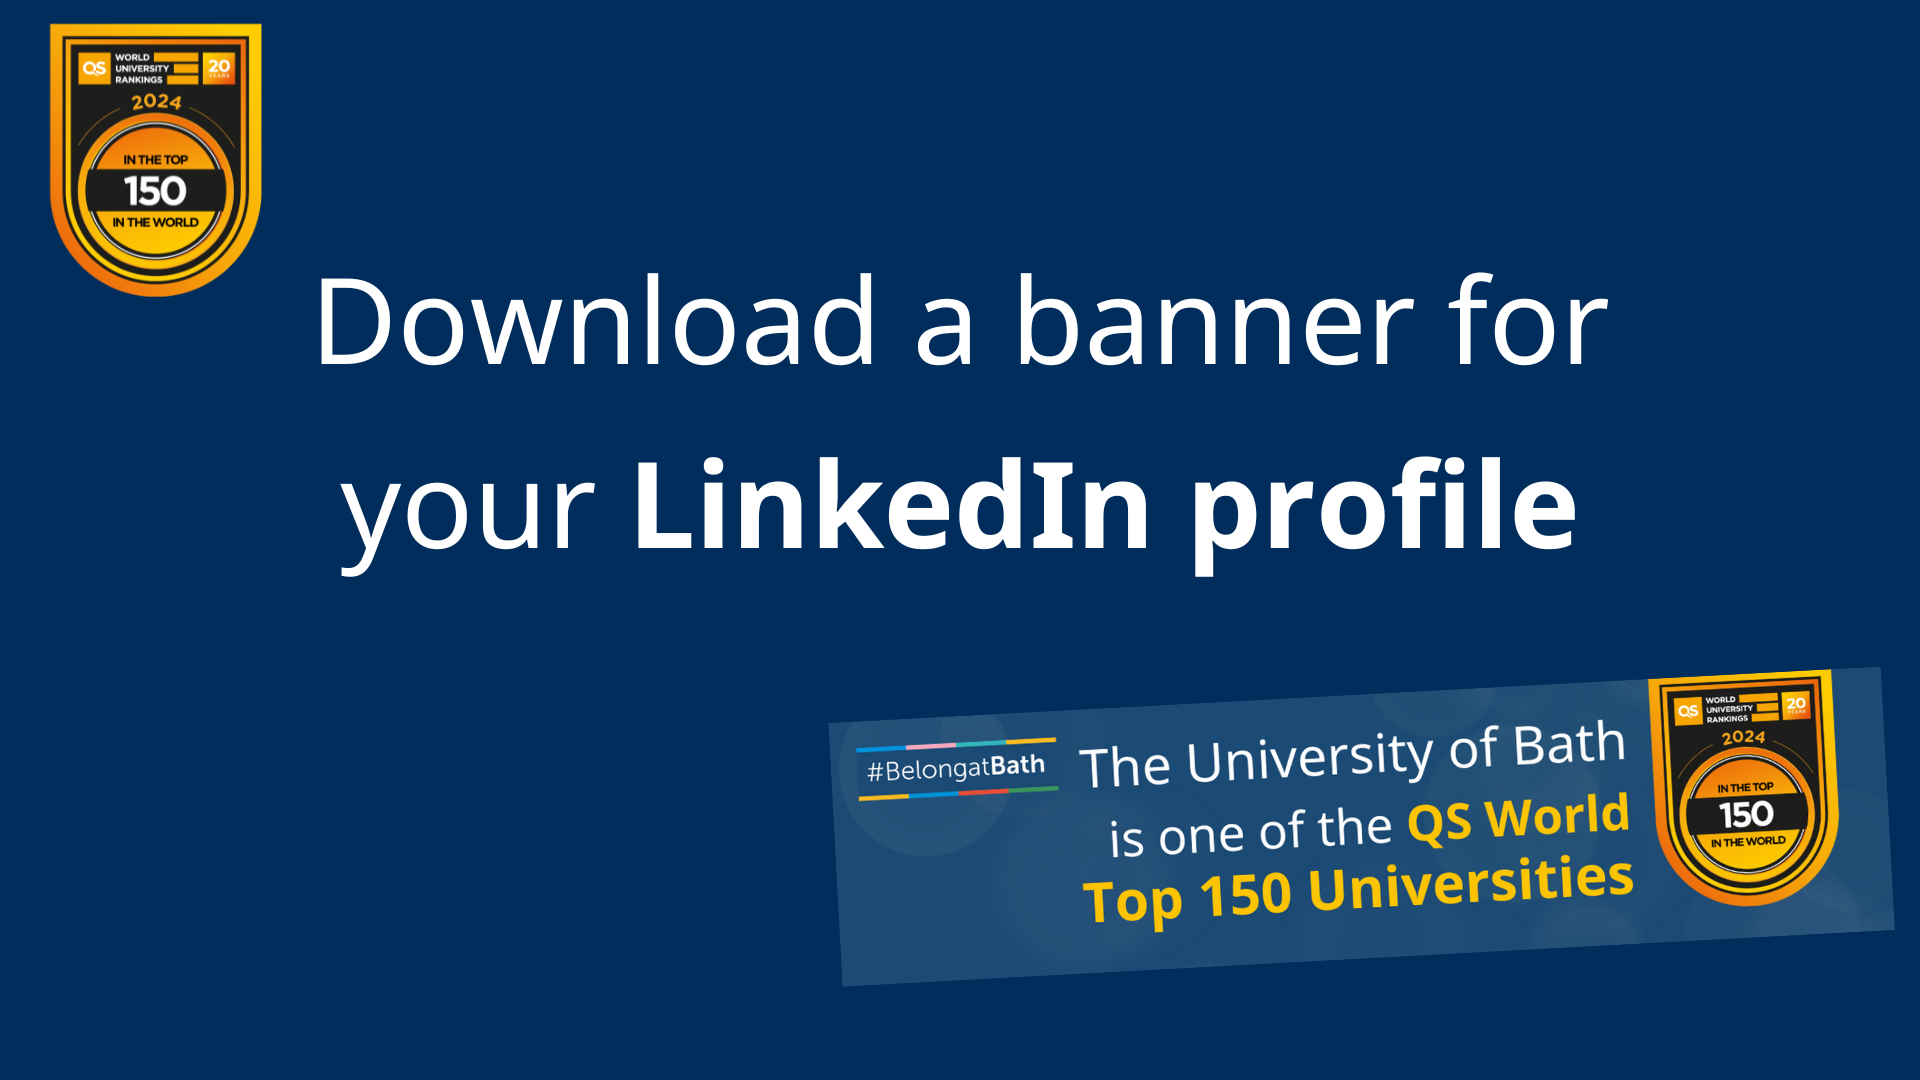 Download a banner for your LinkedIn profile